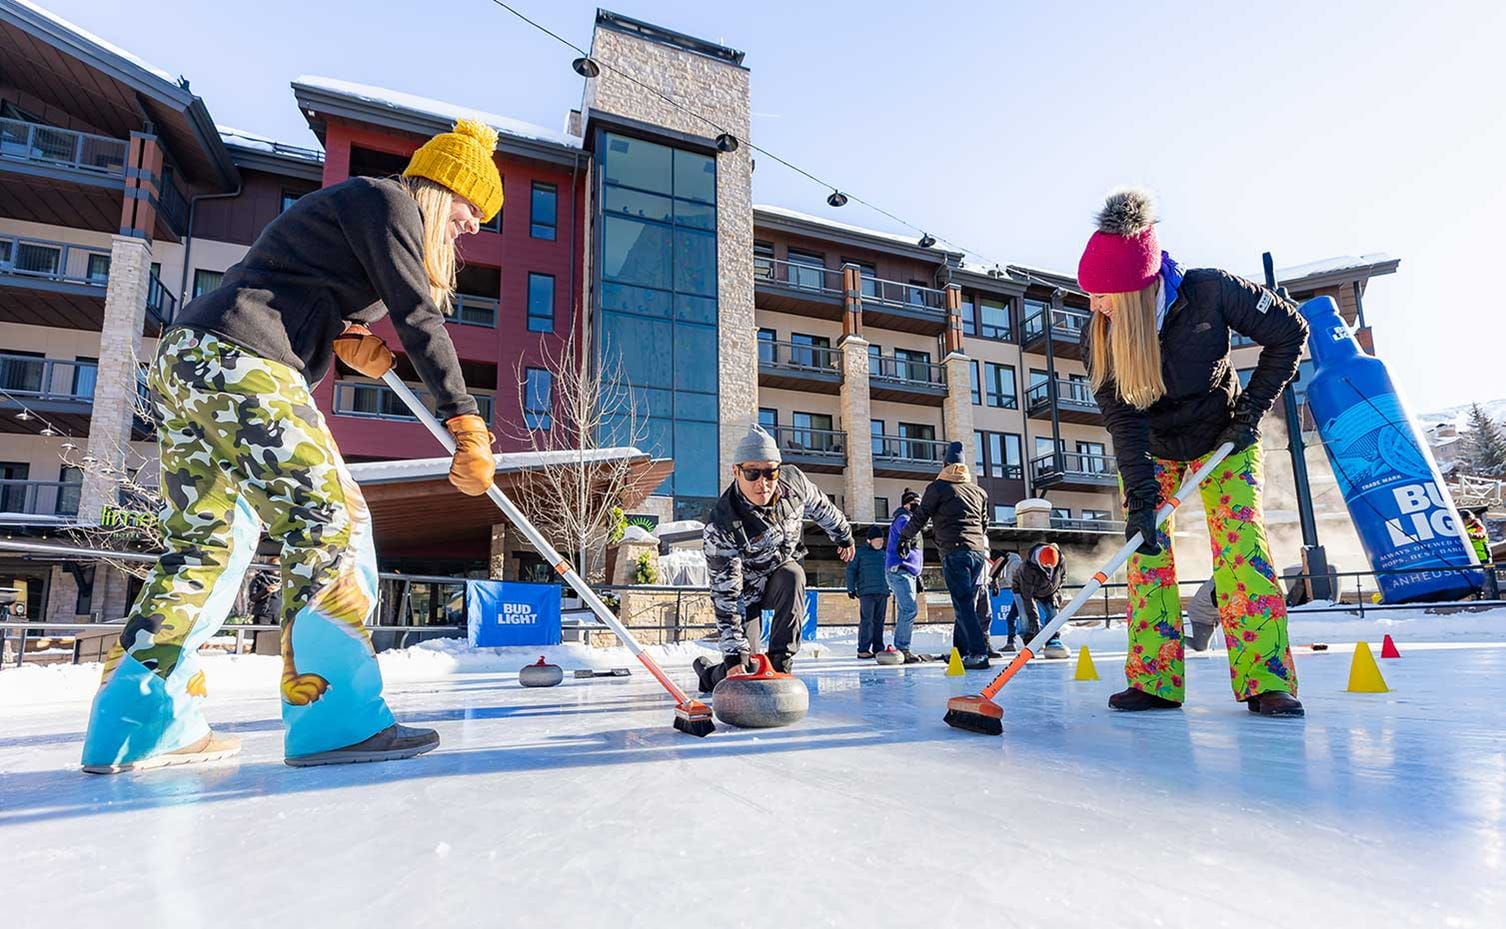 Curling at Snowmass Village